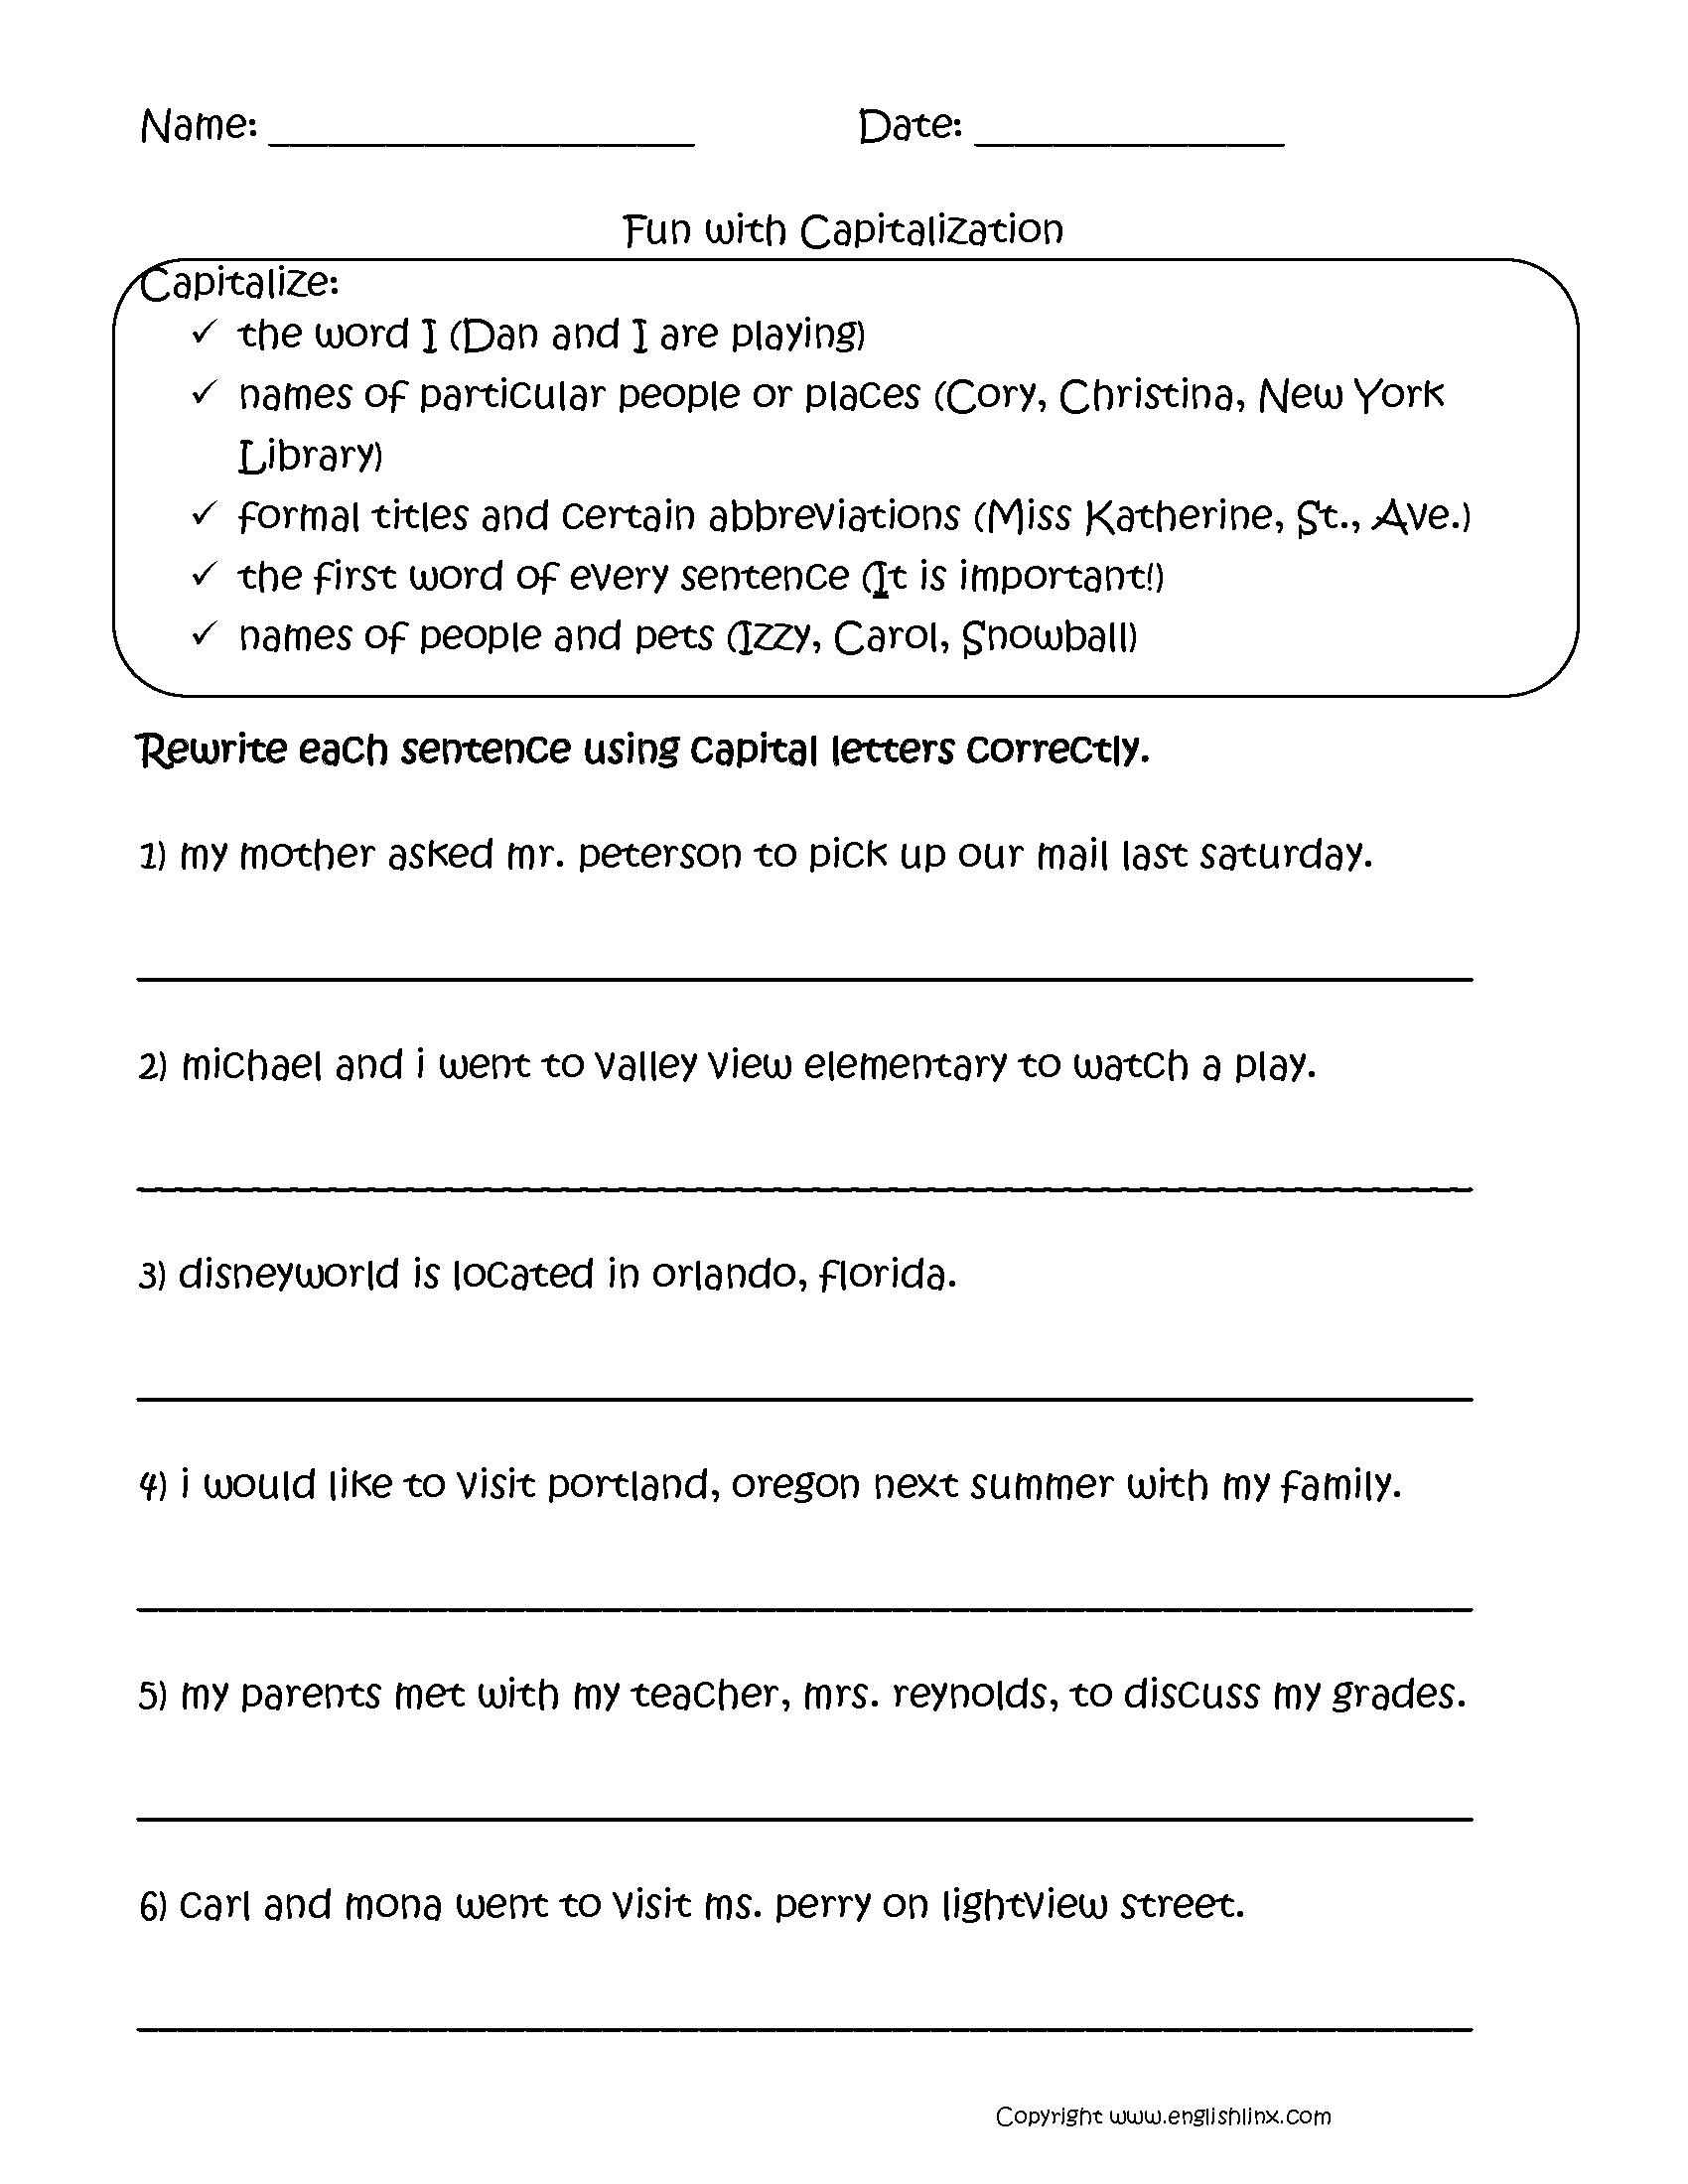 Fun With Capitalization Worksheets | School Work | Grammar | Printable Capitalization Worksheets 4Th Grade